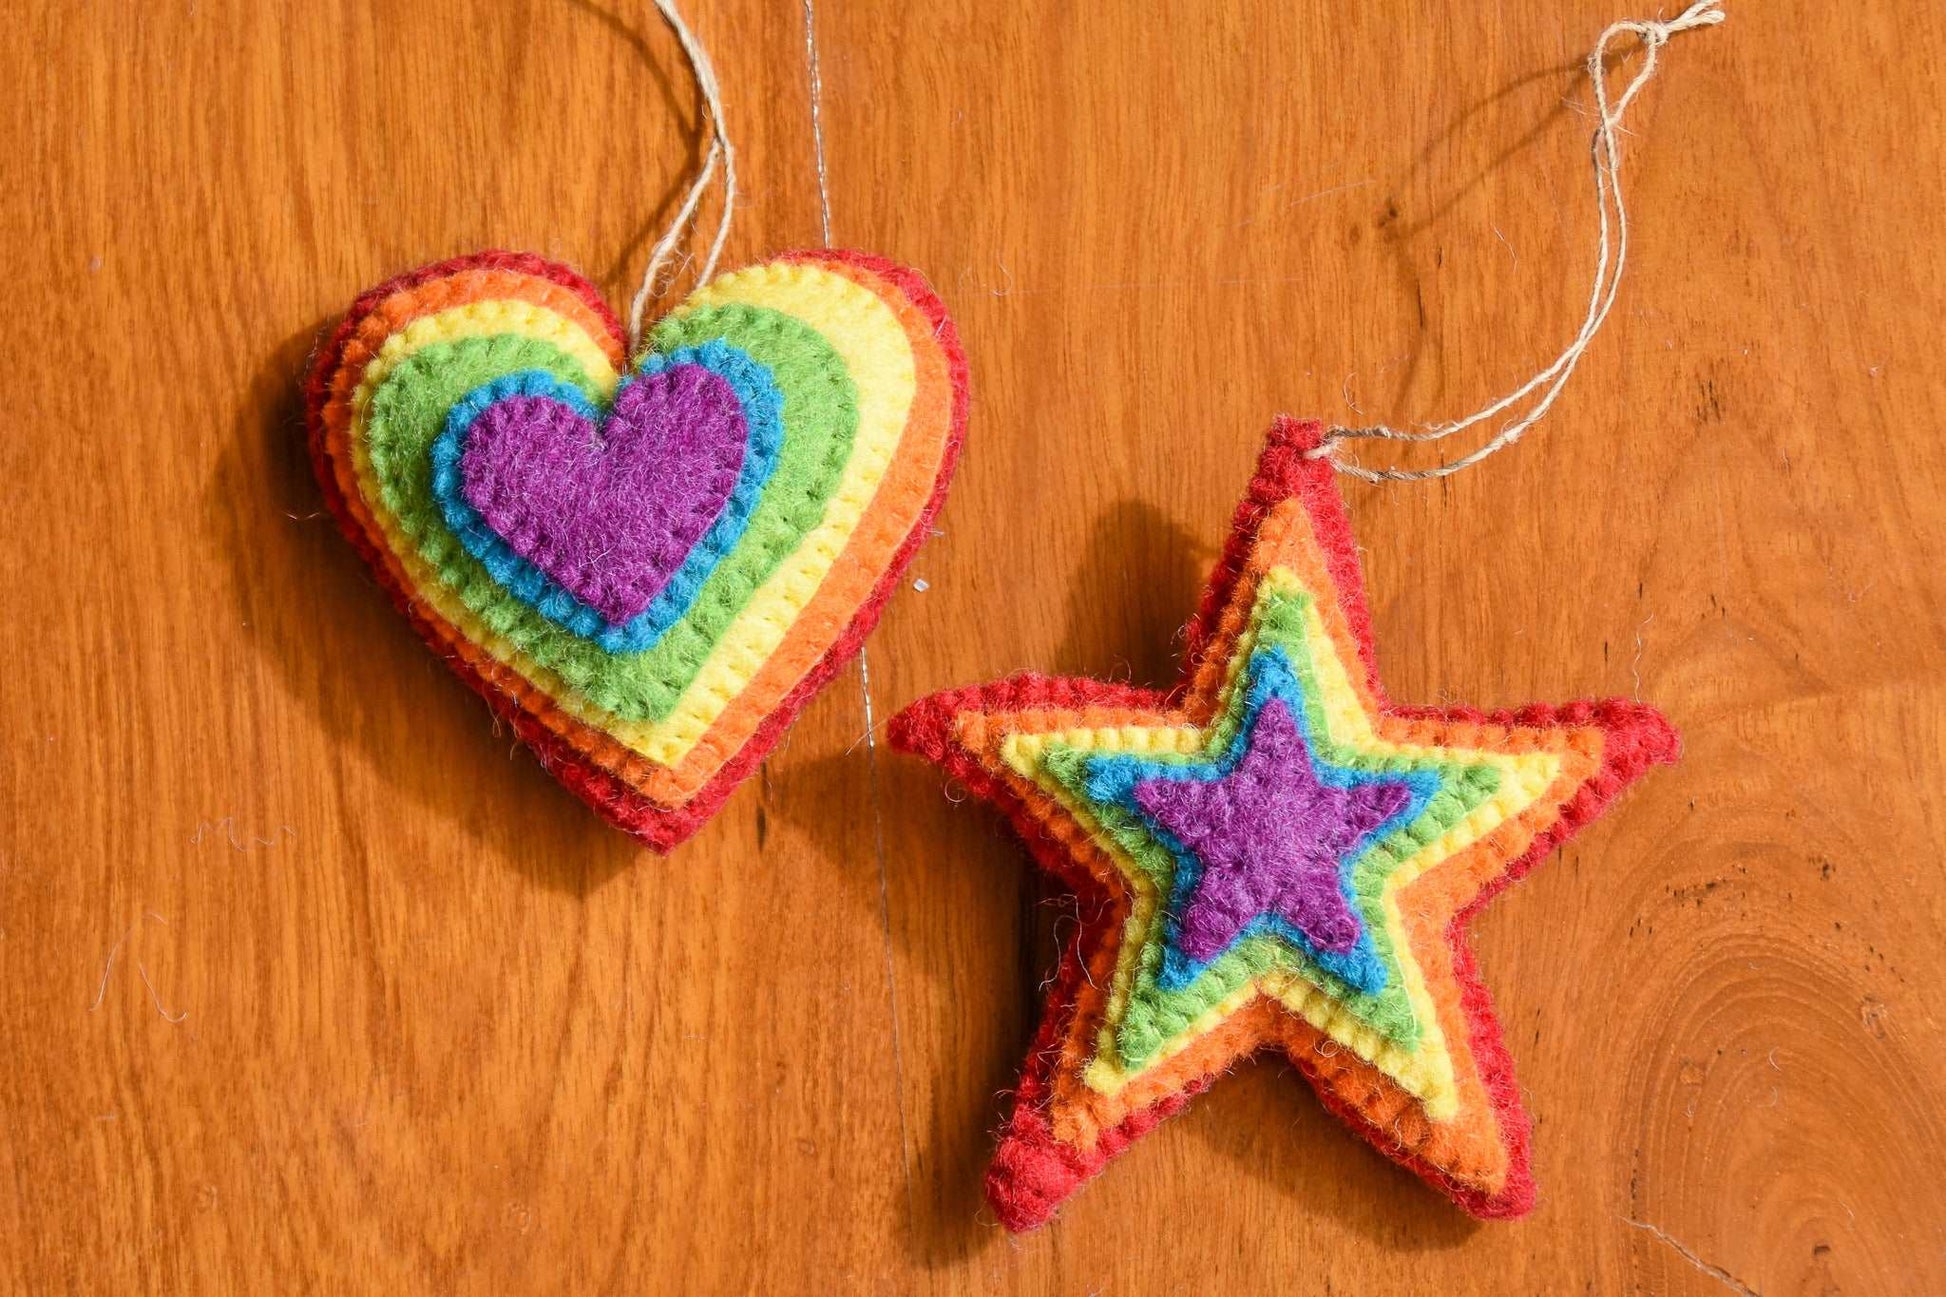 This Global Groove Life, handmade, ethical, fair trade, eco-friendly, sustainable, Rainbow Love, Heart and Star felt ornament set was created by artisans in Kathmandu Nepal and will bring brilliant color and fun to your Christmas tree this holiday season.